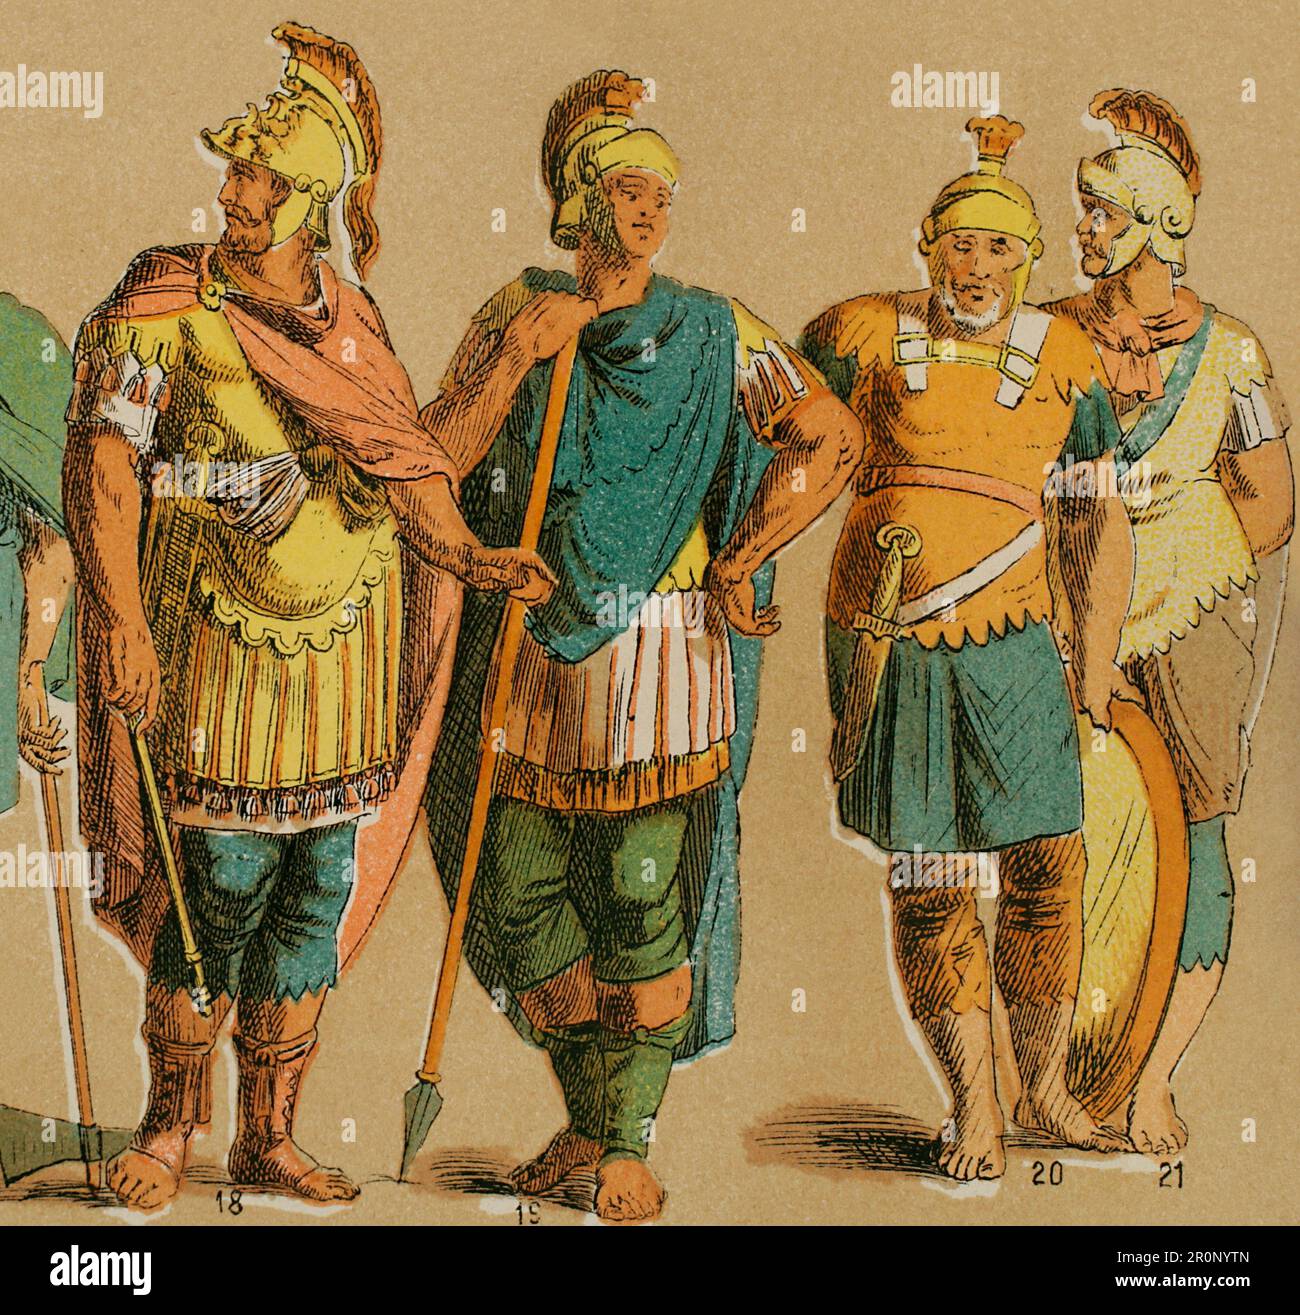 Eastern Roman Empire. Byzantines (400-600). From left to right: 18- general's clothing, 19, 20 and 21- warrior. Chromolithography. 'Historia Universal', by César Cantú. Volume III, 1882. Stock Photo